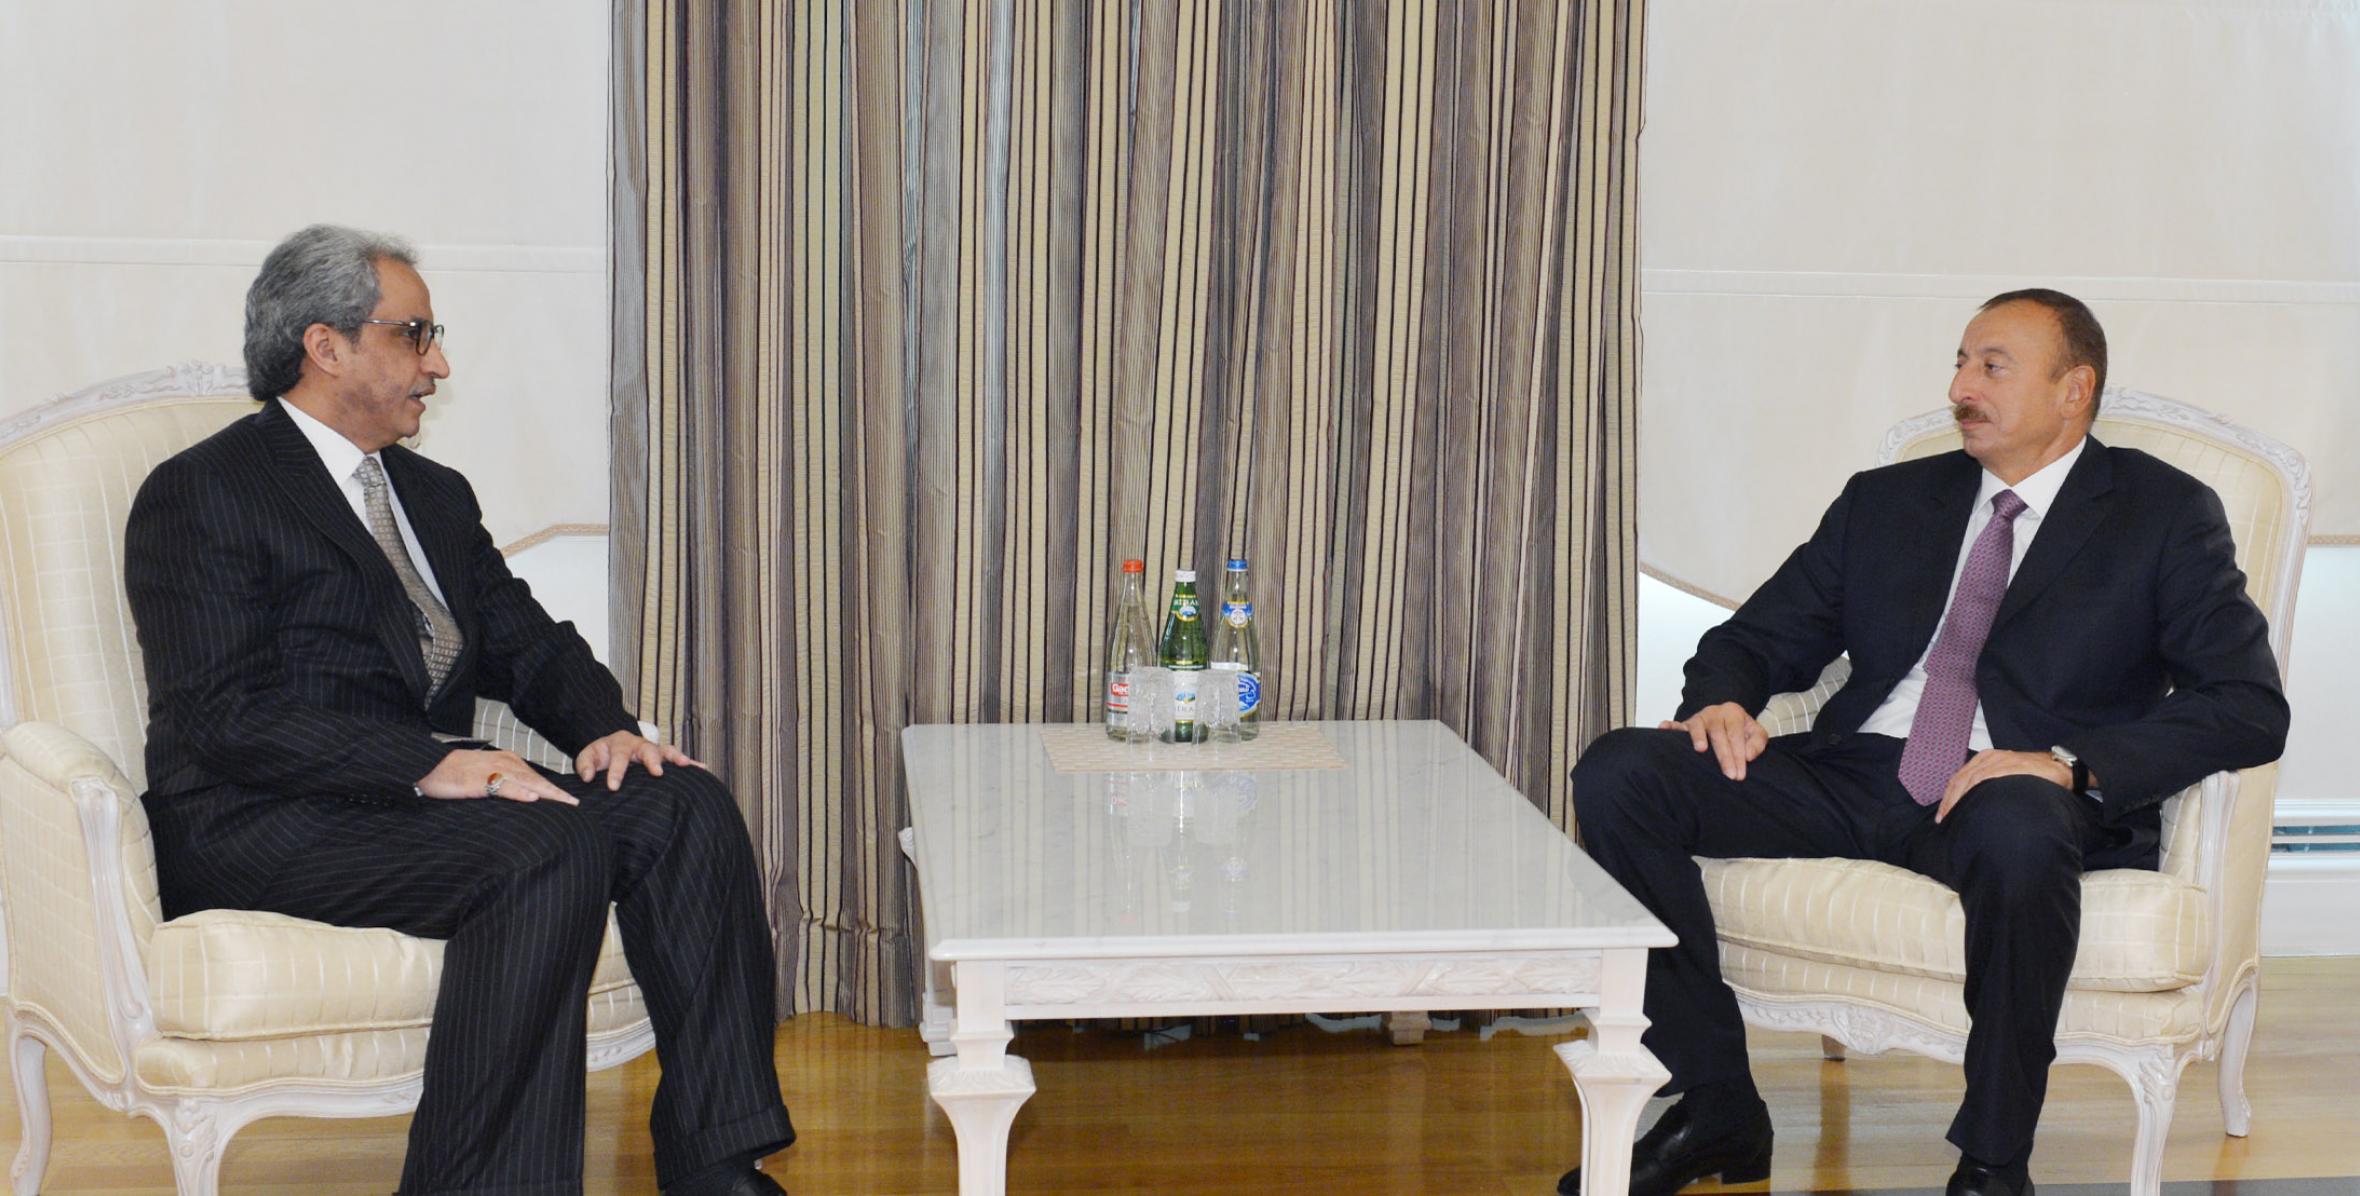 Ilham Aliyev received the Ambassador of the State of Kuwait to Azerbaijan at the end of his diplomatic mission in the country